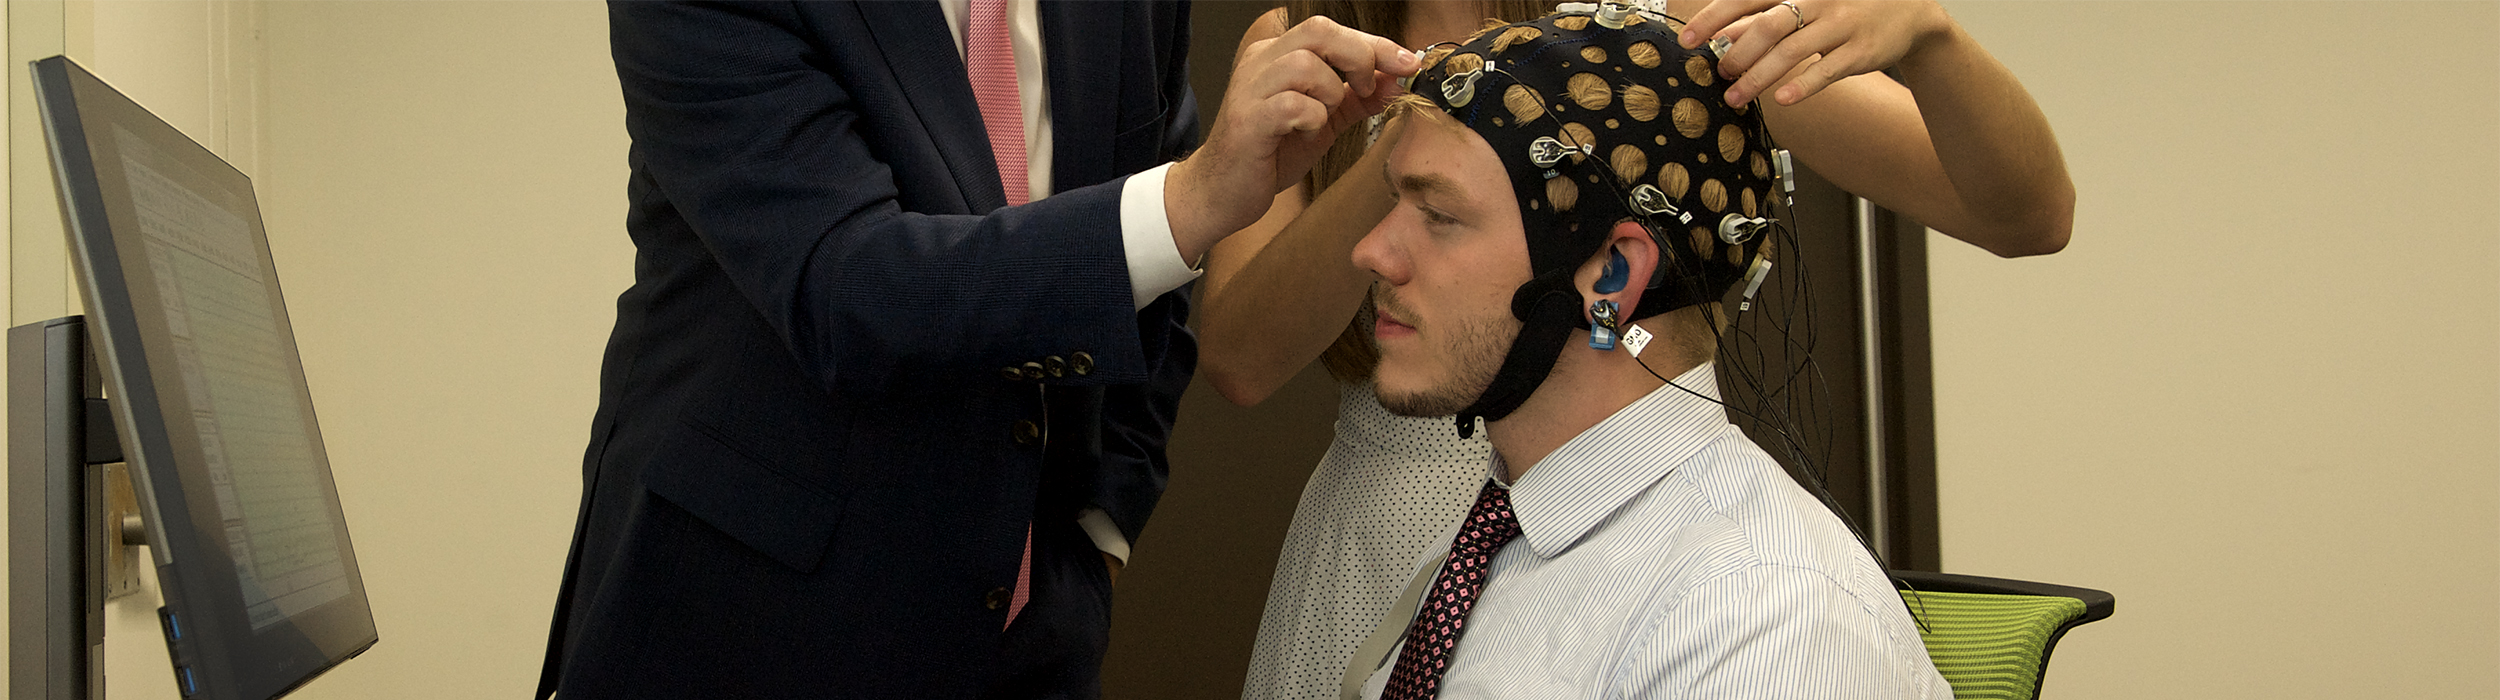 Photo of staff fitting research subject with electrode cap